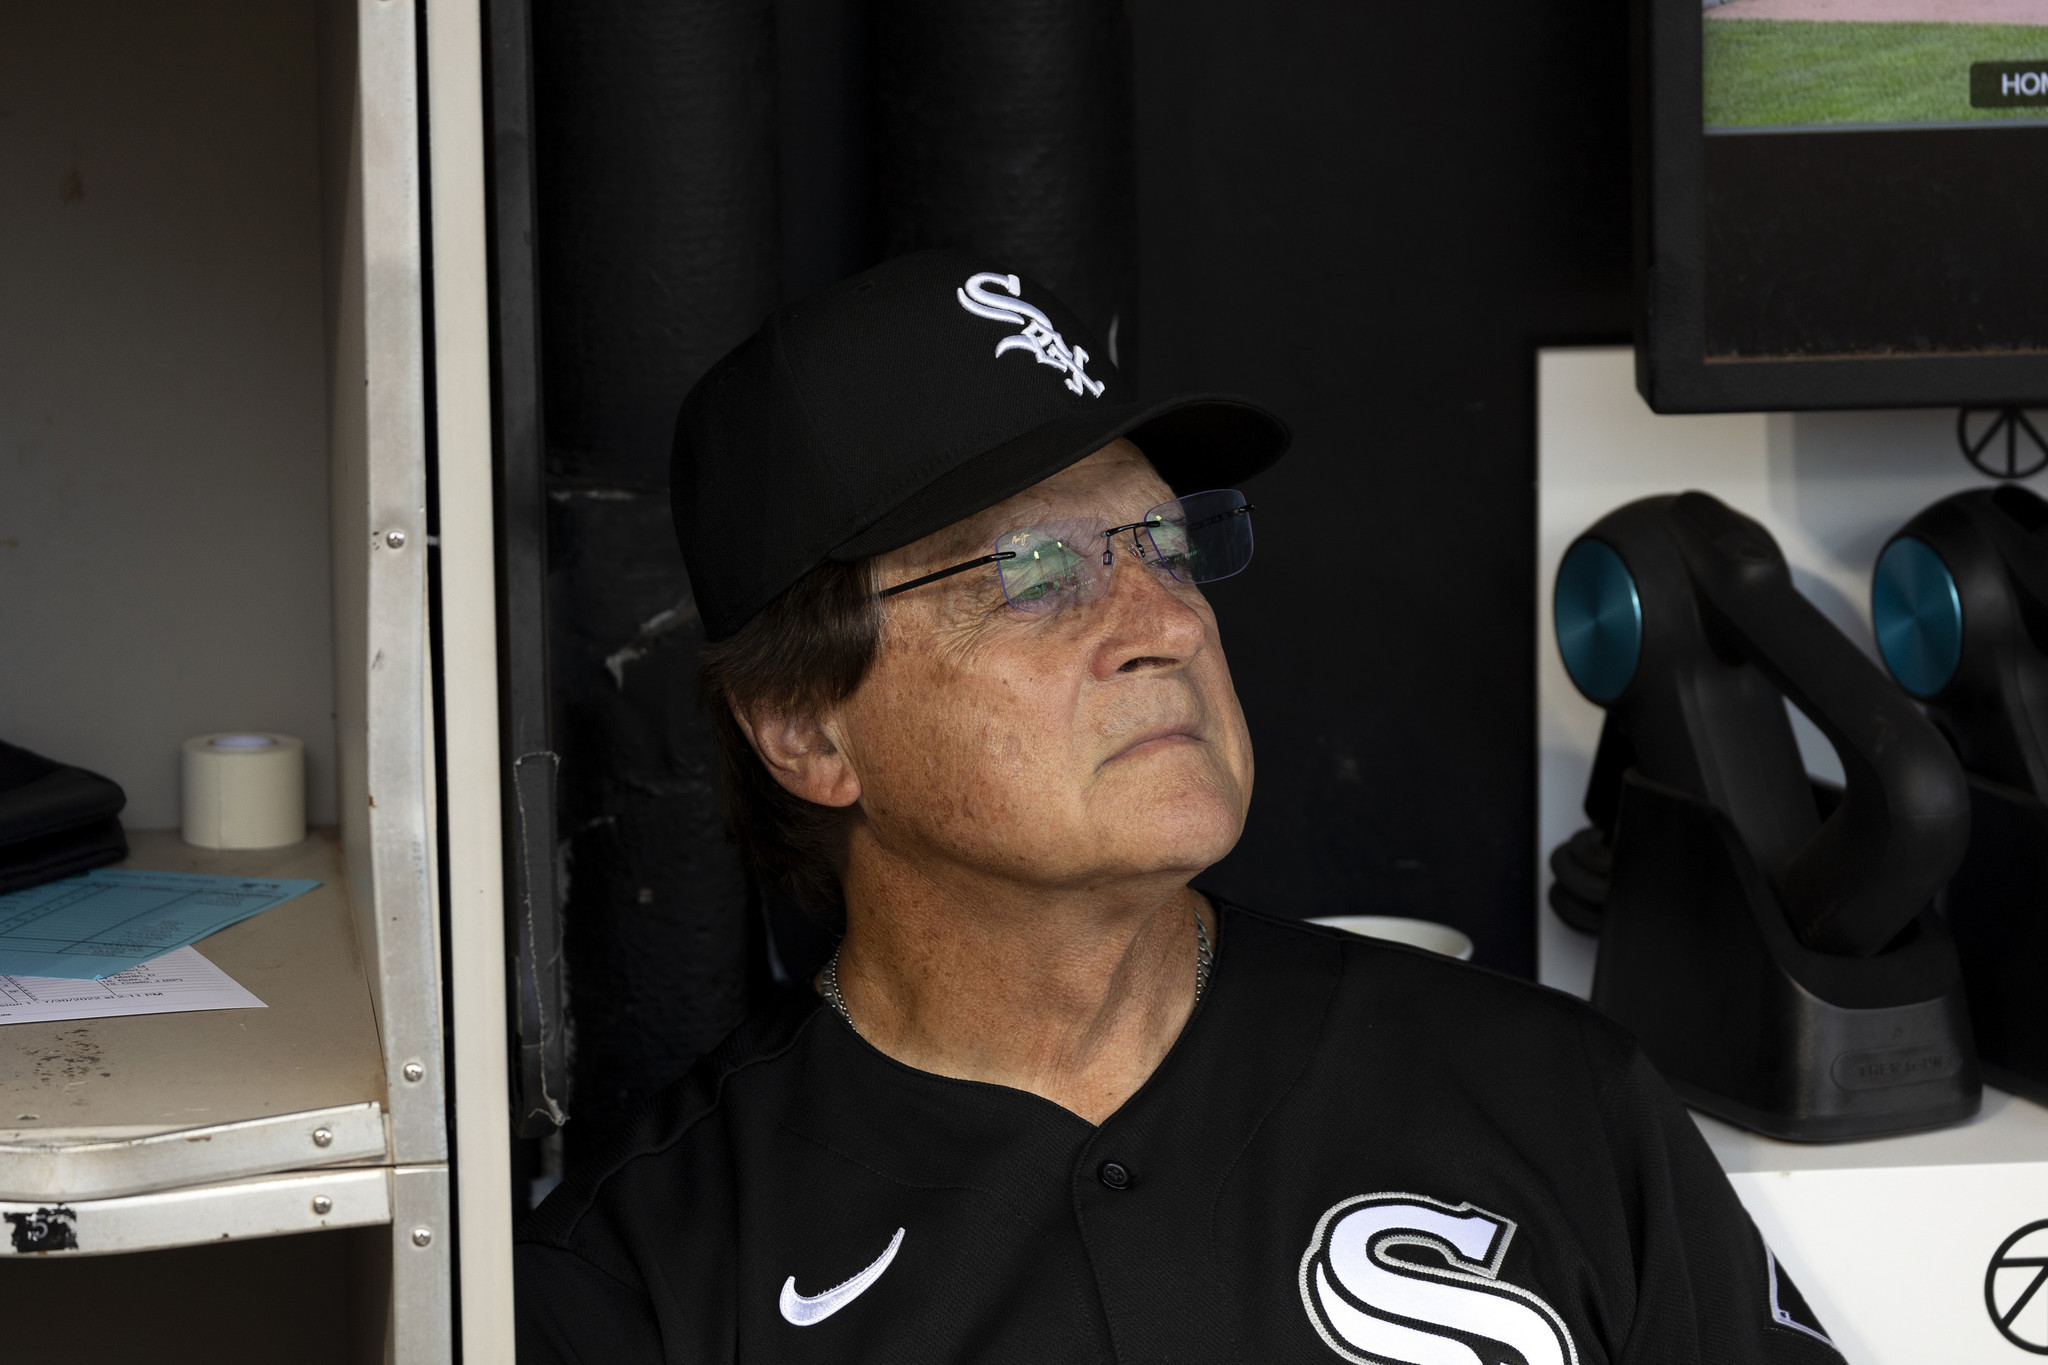 With Tom Seaver as a model, the White Sox were on the forefront of